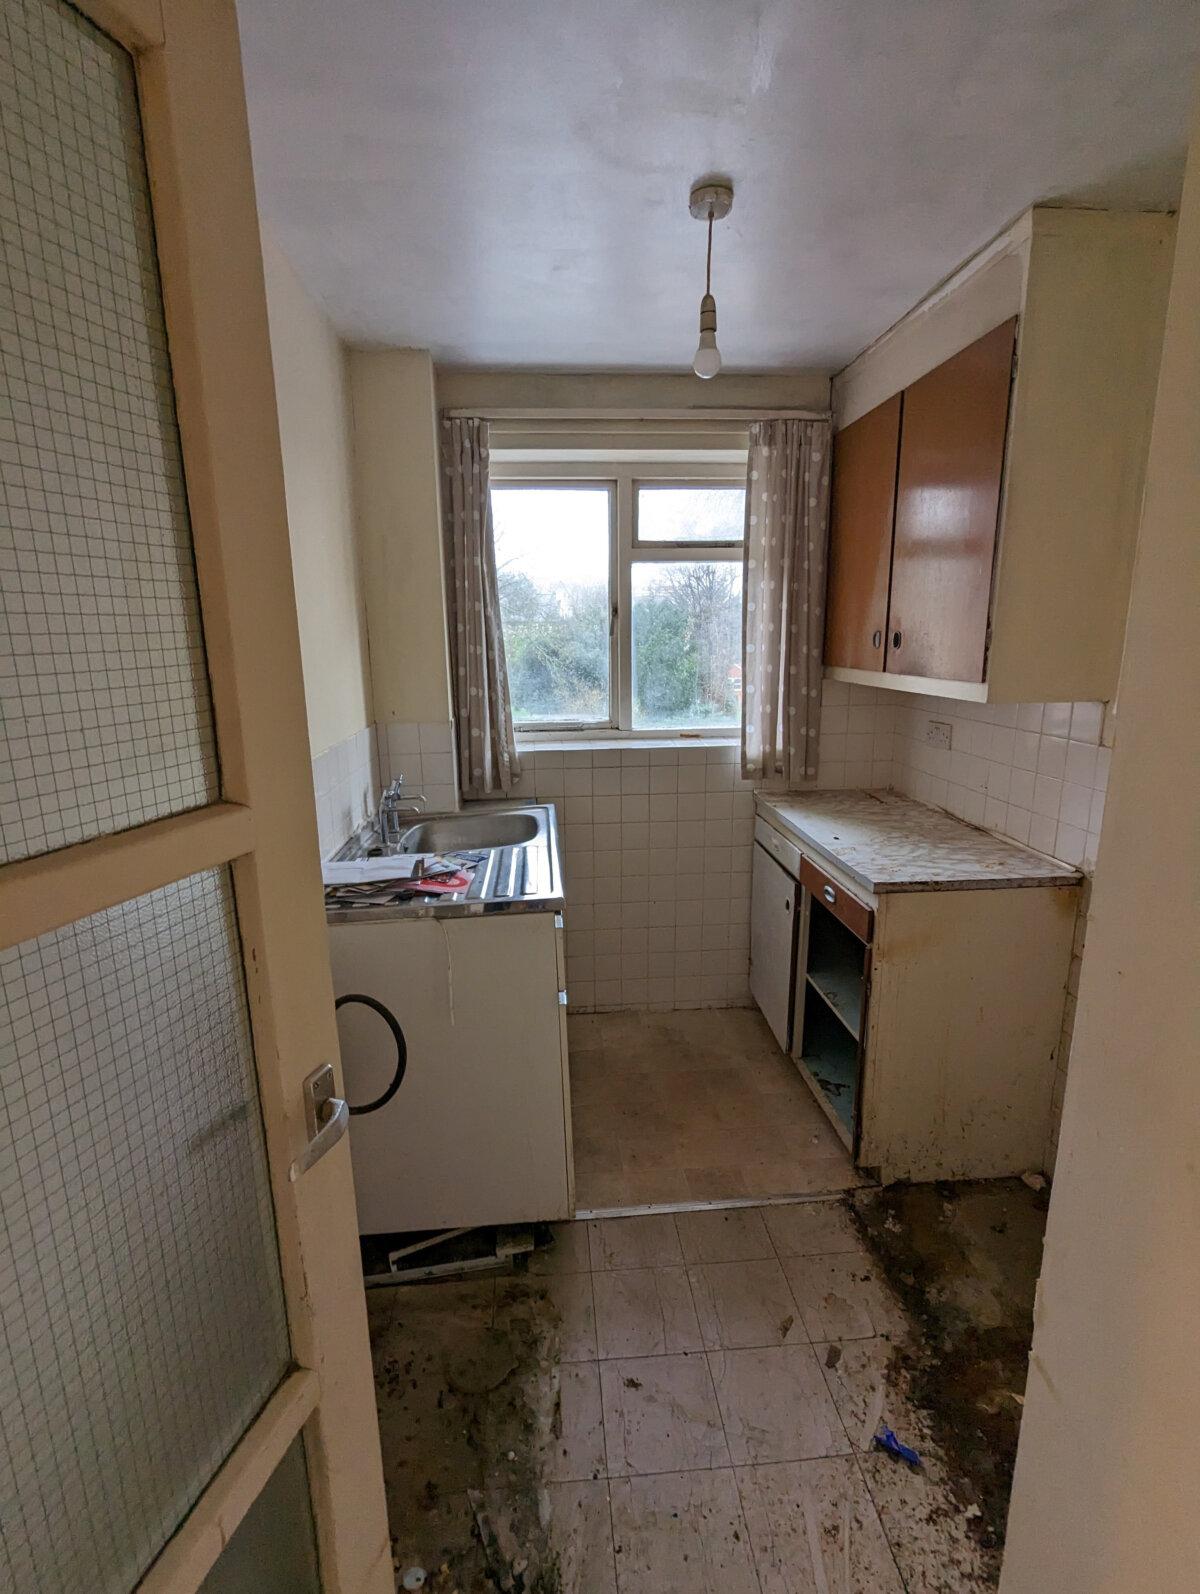 The kitchen before being renovated. (SWNS)